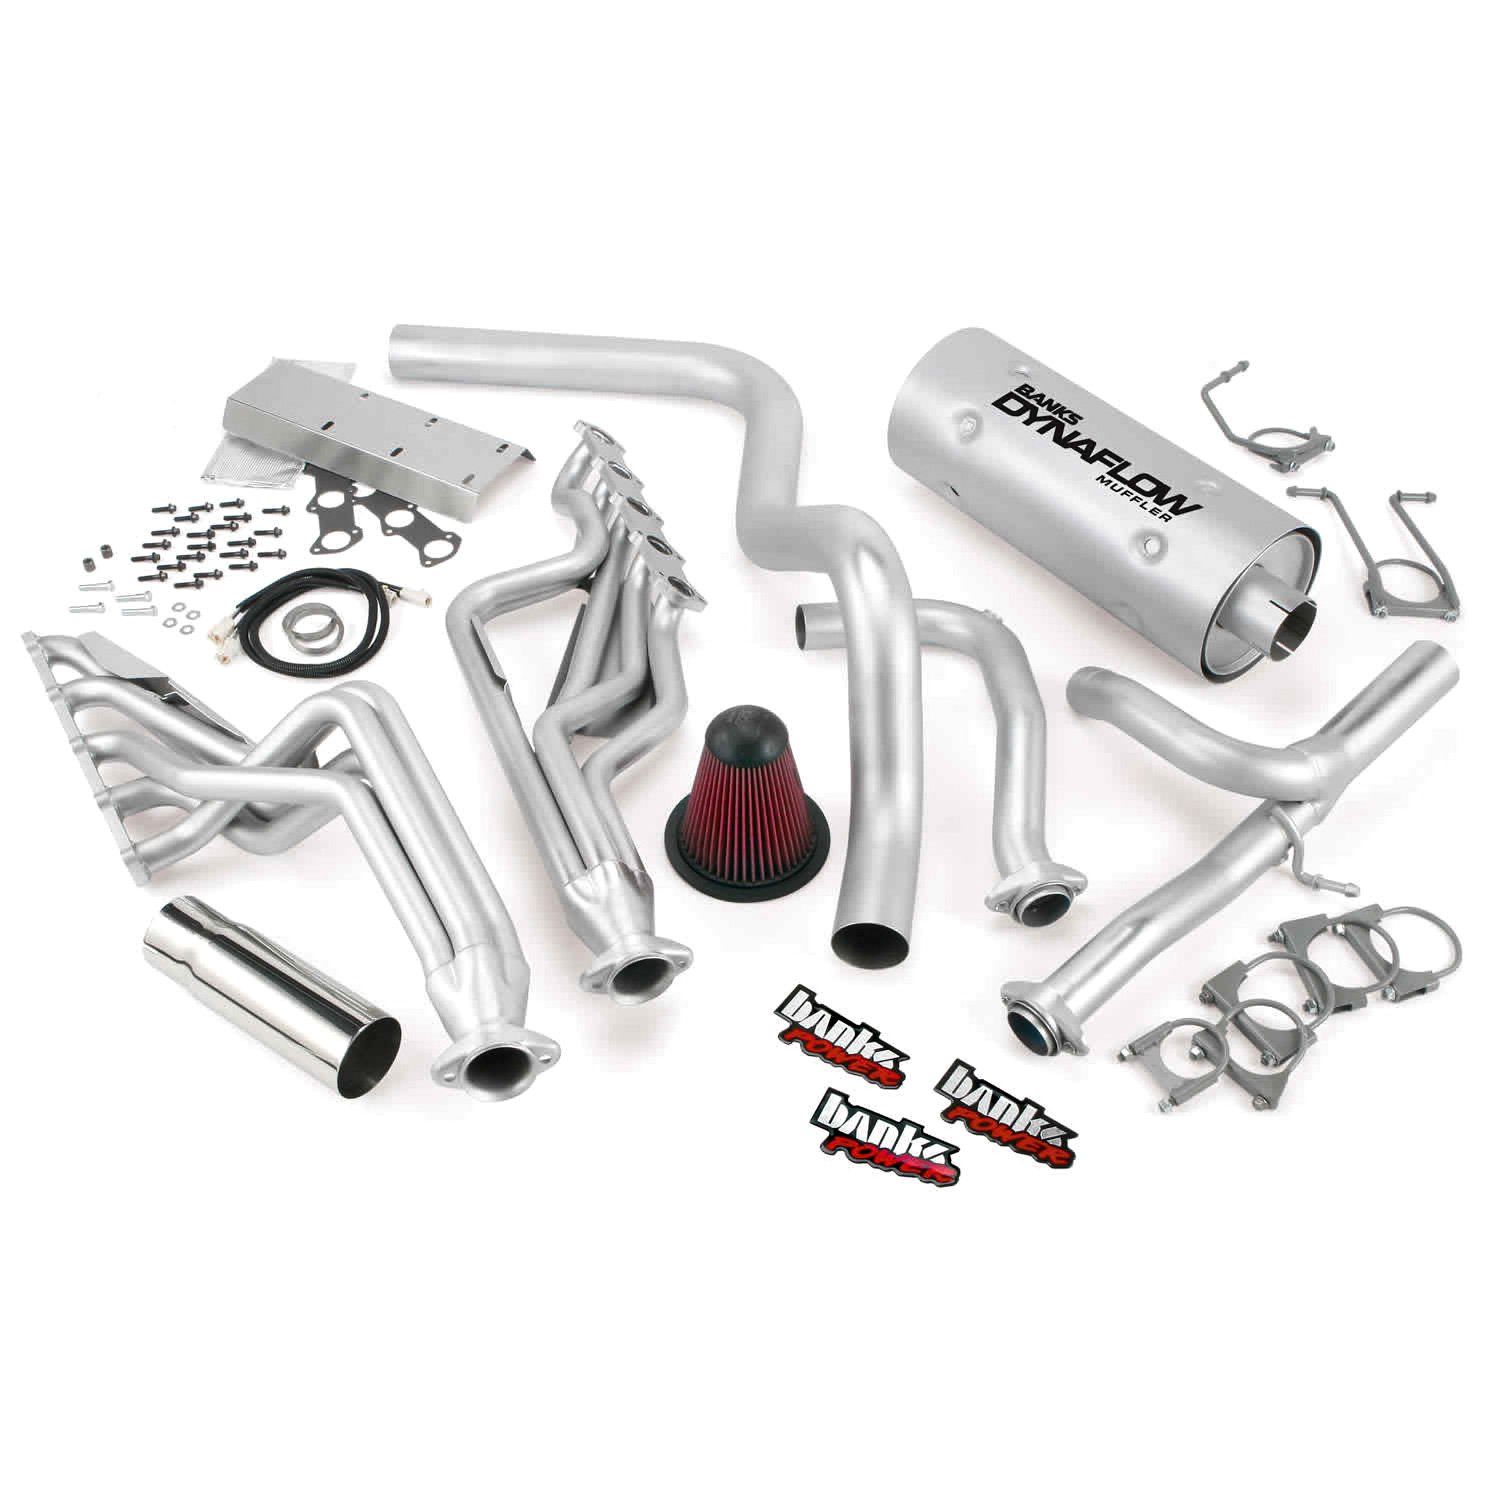 Exhaust PowerPack System 1997-03 Ford Class C Motorhome